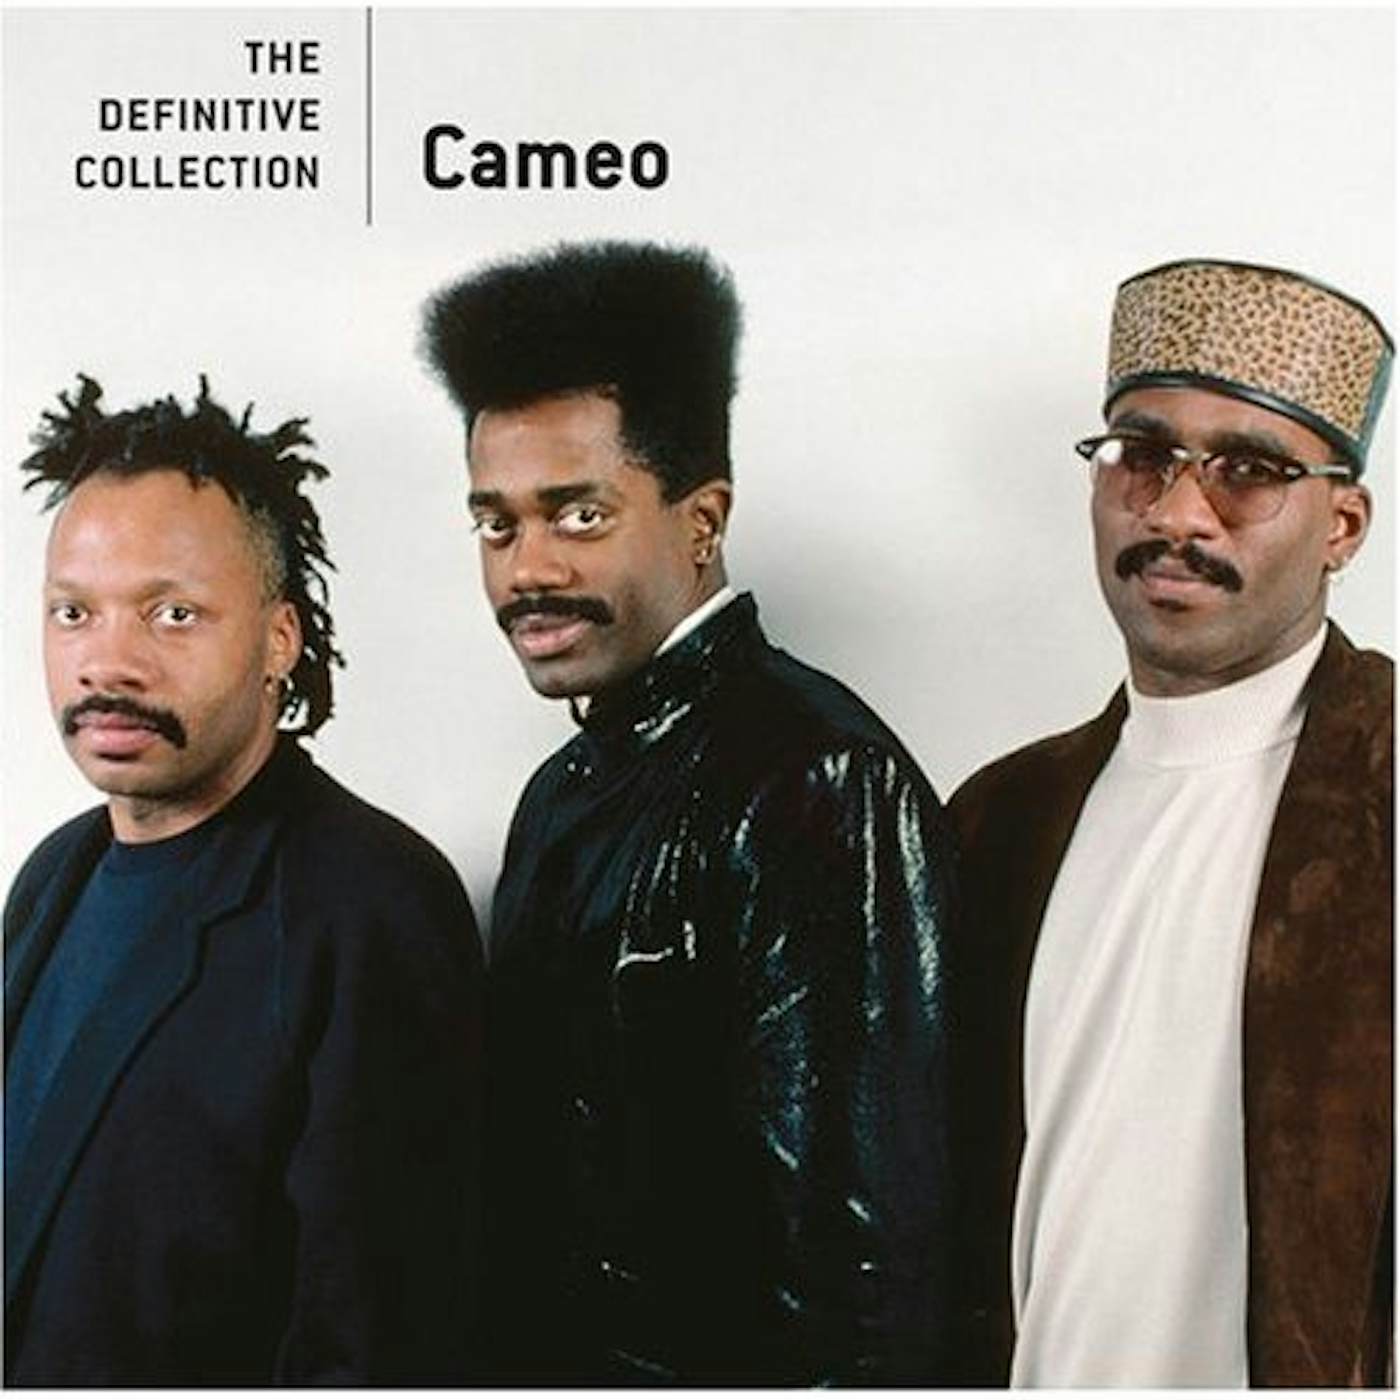 Cameo DEFINITIVE COLLECTION CD